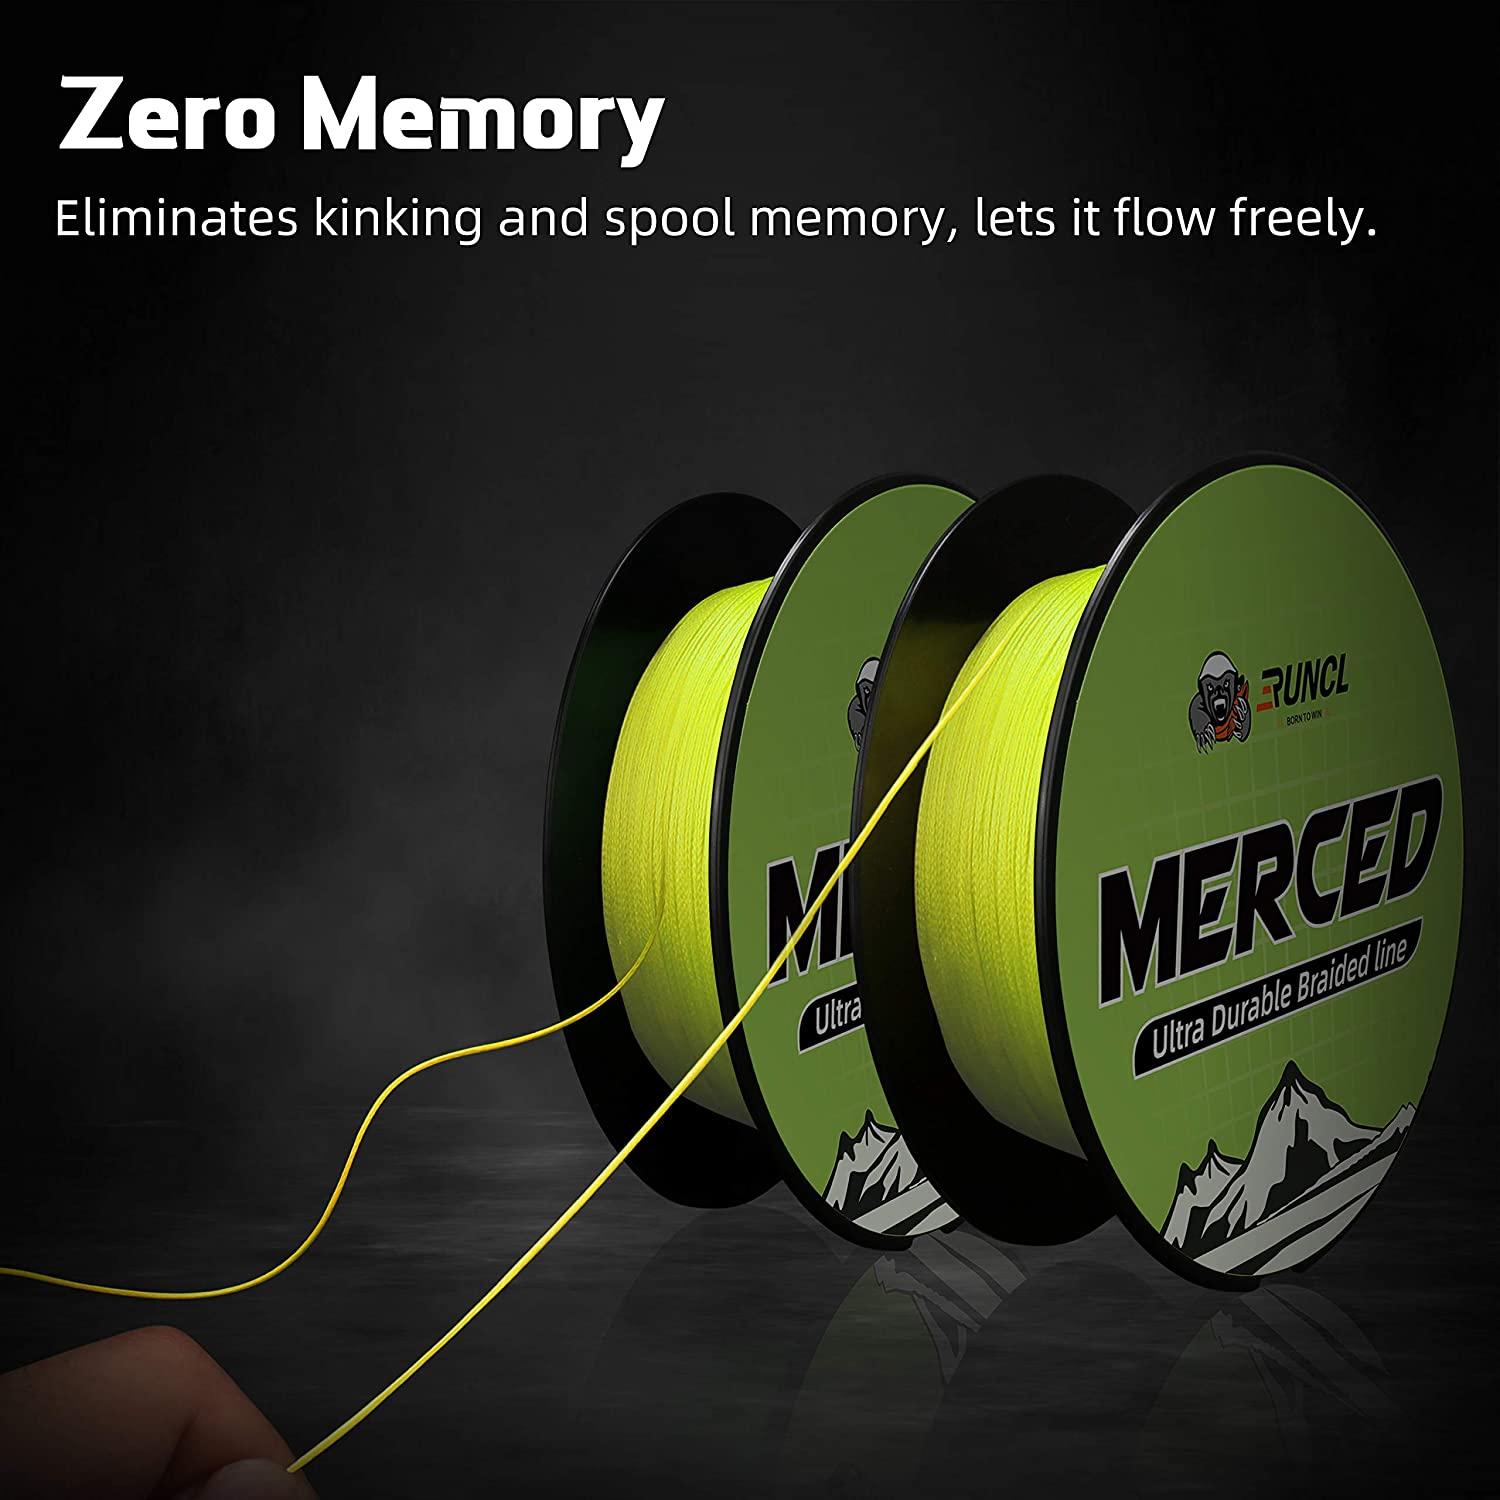 RUNCL Braided Fishing Line Merced, 1000 500 300 Yards Braided Line 4 8  Strands, 6-200LB - Proprietary Weaving Tech, Thin-Coating Tech, Stronger  Smoother - Fishing Line for Freshwater Saltwater Hi-Vis Yellow  20LB(9.1kgs)/0